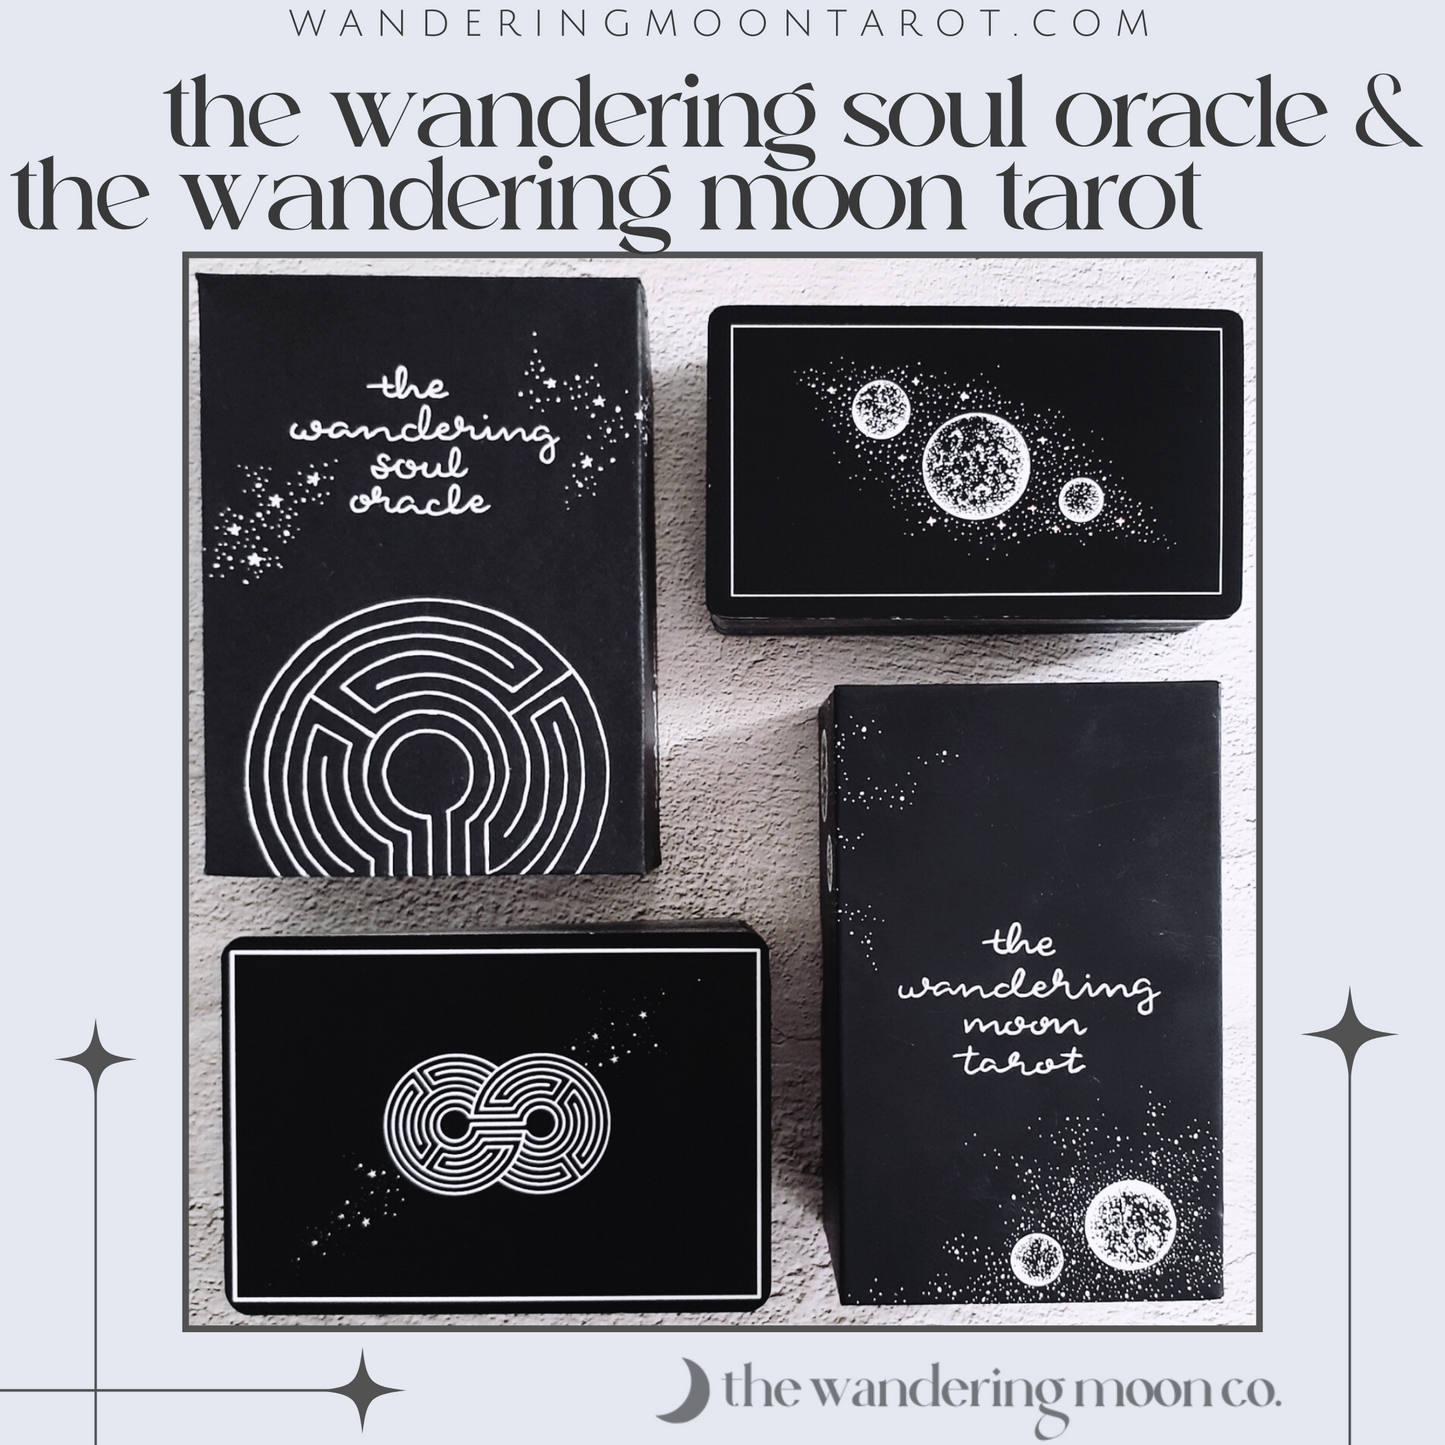 tarot card & oracle deck gift set: indie decks set | holographic, unique aesthetic | white & black tarot cards & oracle cards | divination guide booklets with tarot spreads